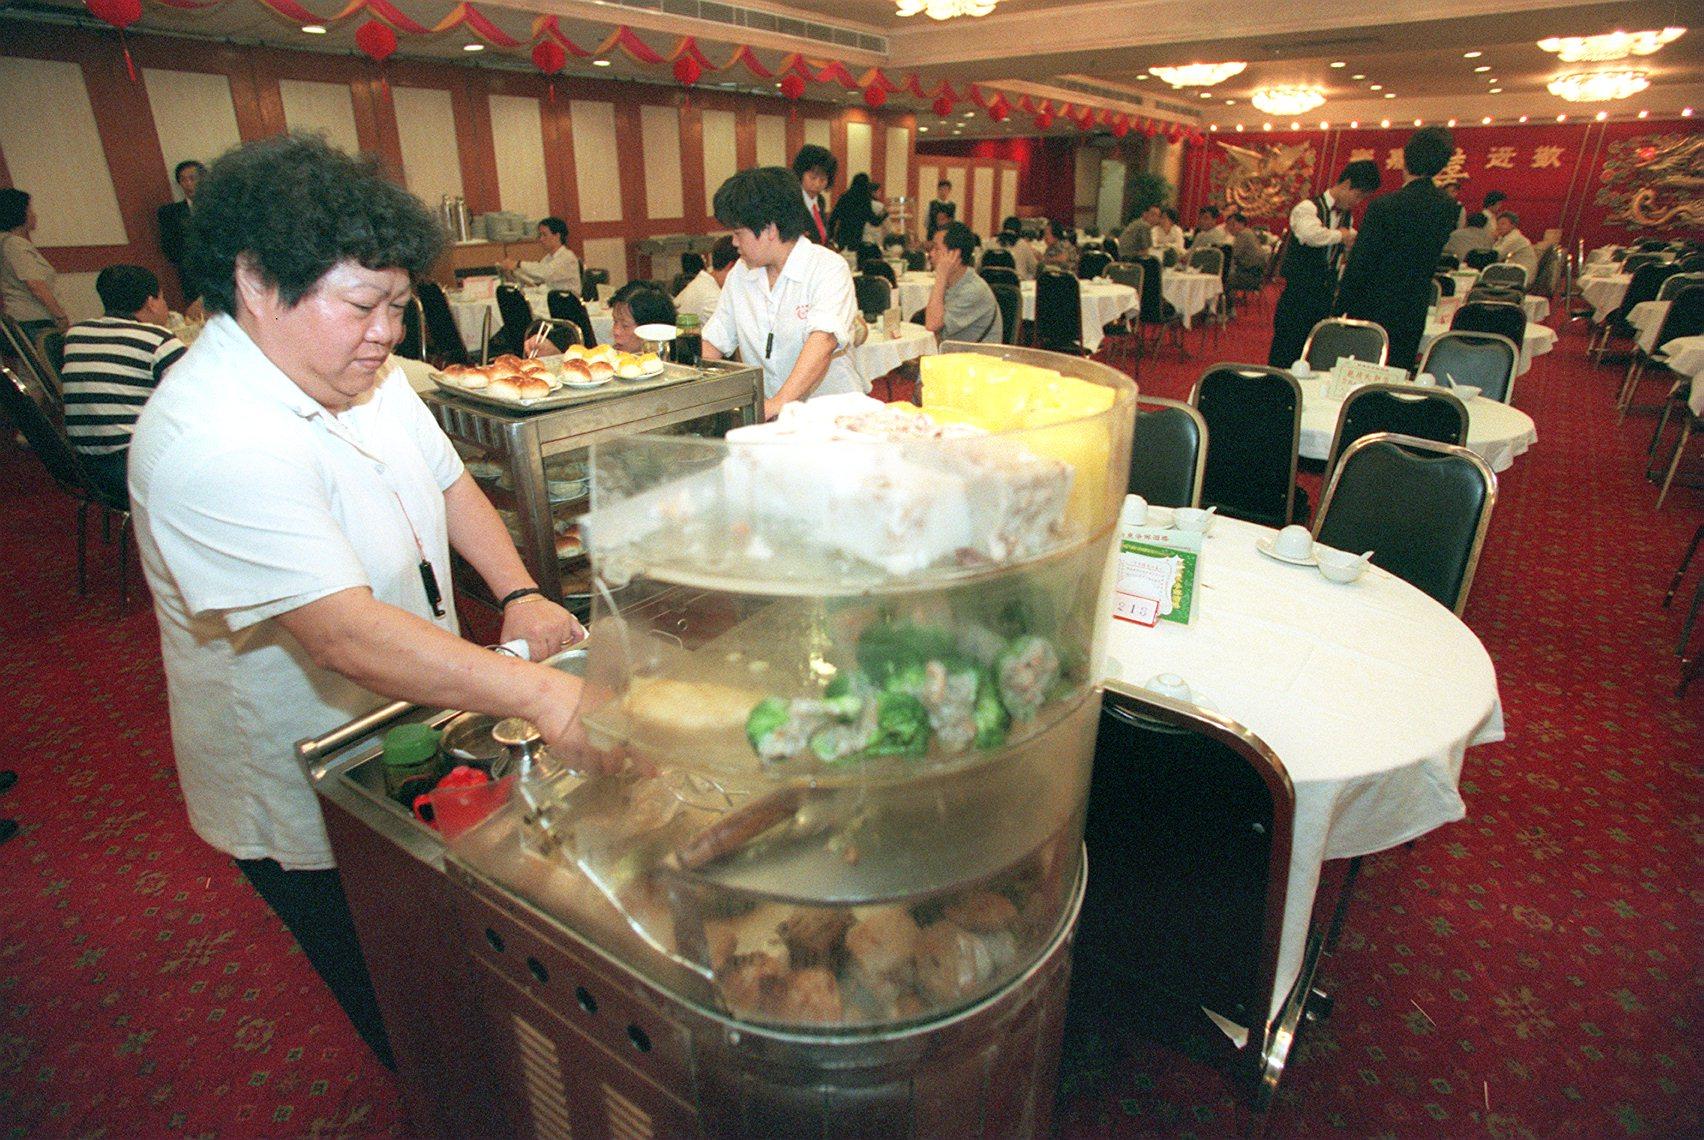 “Dim sum aunties” push trollies of food at the New Kwong Tung Seafood Restaurant in Tuen Mun, Hong Kong, in May 1997. Offering retro-themed dining events incorporating traditional dishes could form part of a “time travel” tourism concept that could boost visitors to the city. Photo: SCMP